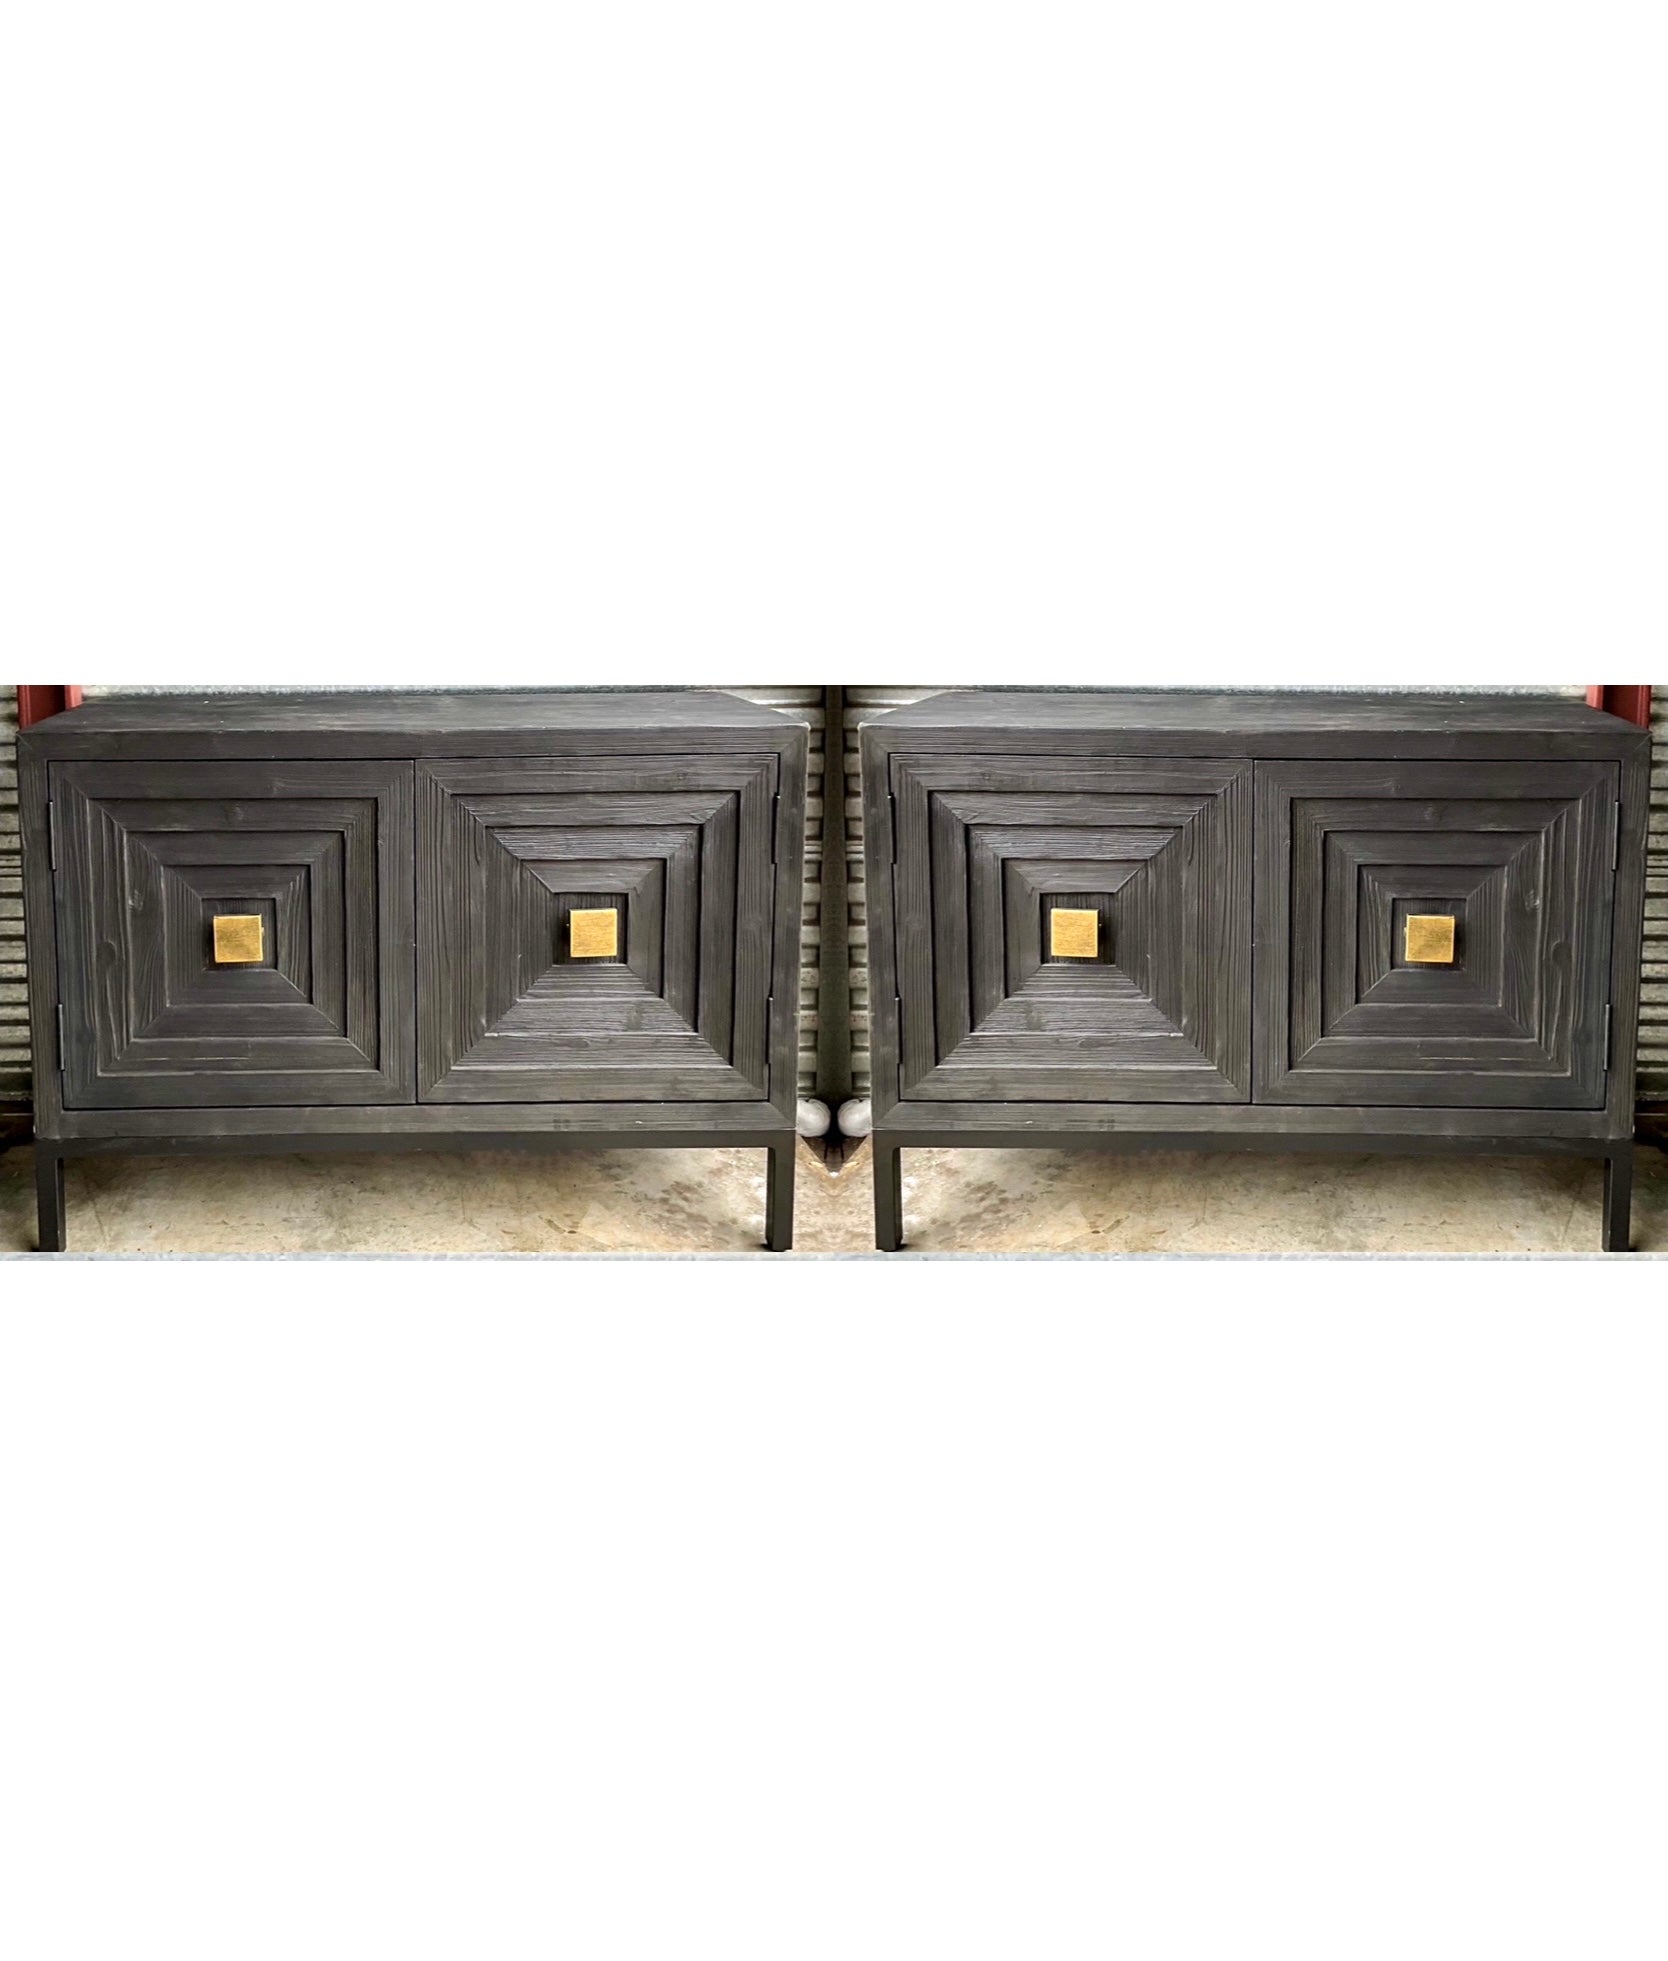 This is a pair of new organic modern cabinets by Uttermost. They have a distressed black finish and gilt metal accents. Original tags.

